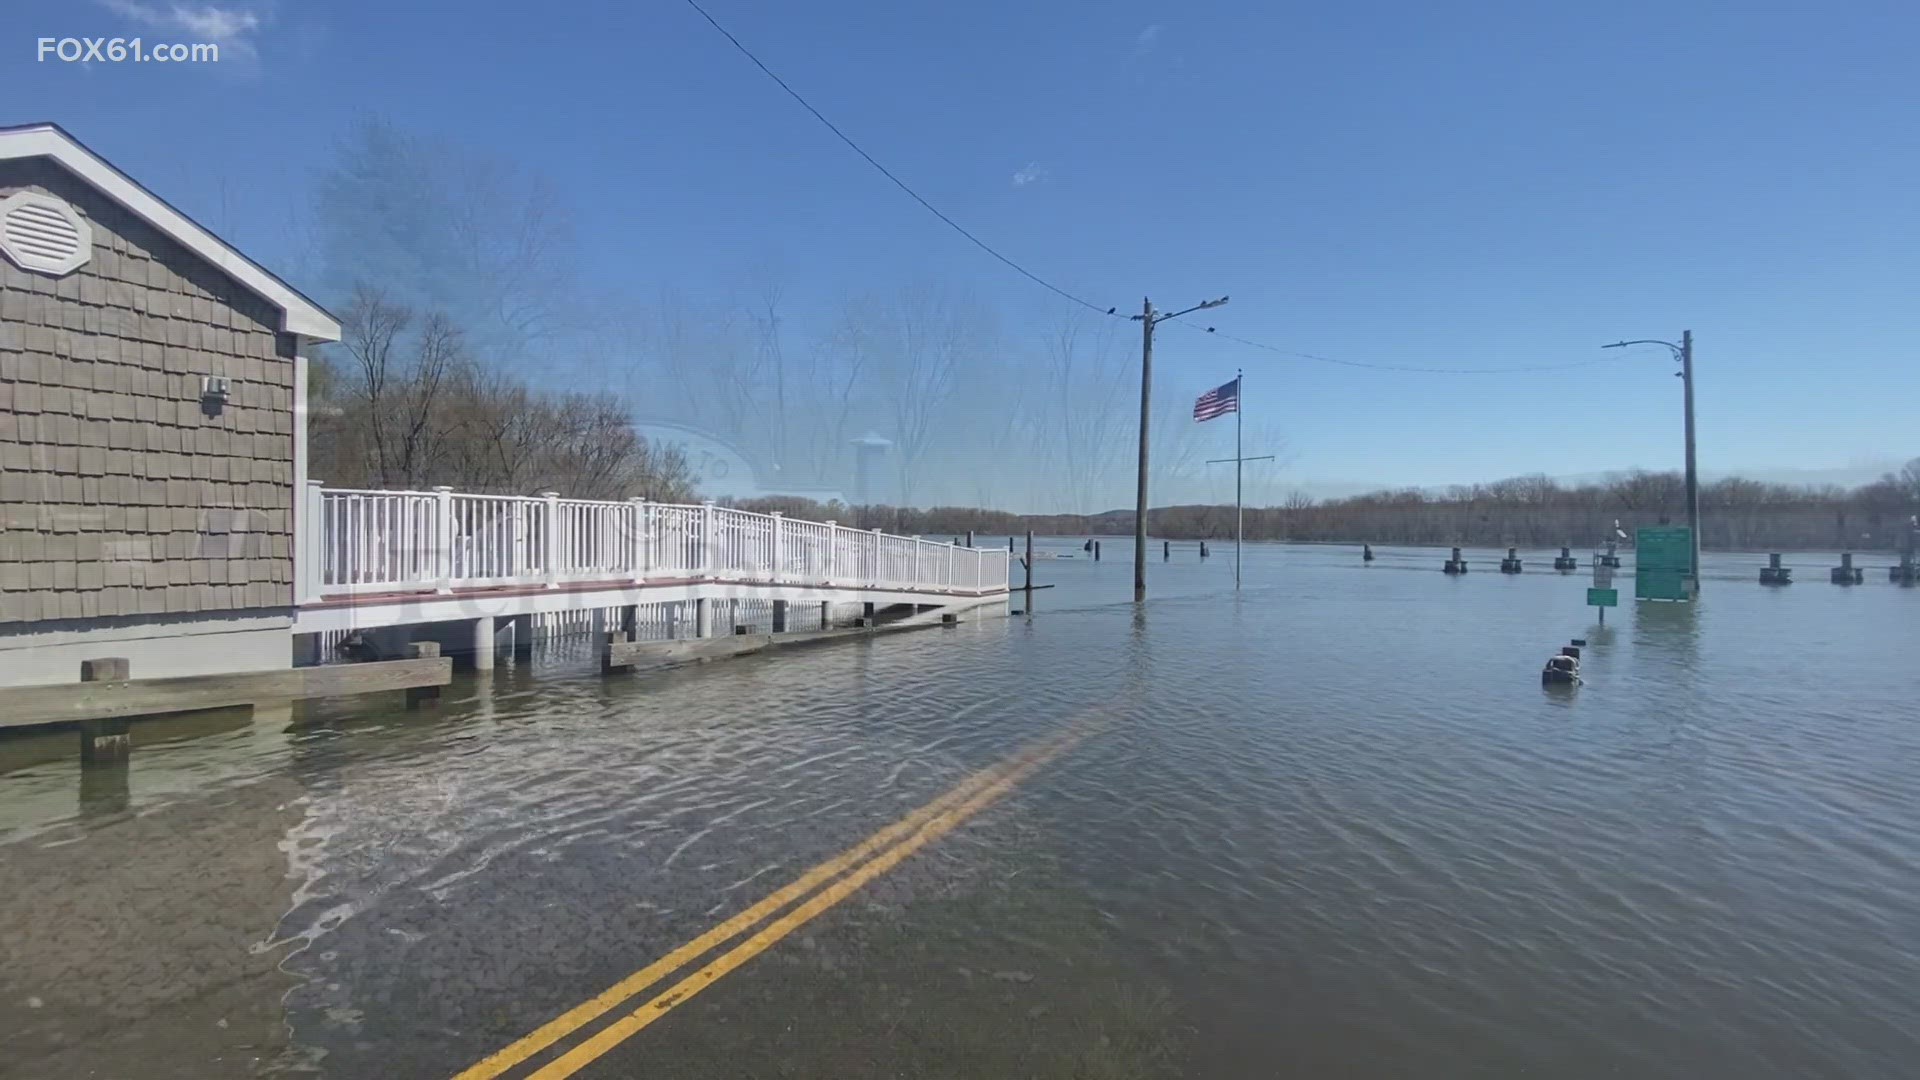 The historic ferries connecting Rocky Hill to Glastonbury and Chester to Hadlyme usually open April 1. High water has prevented service from starting so far.